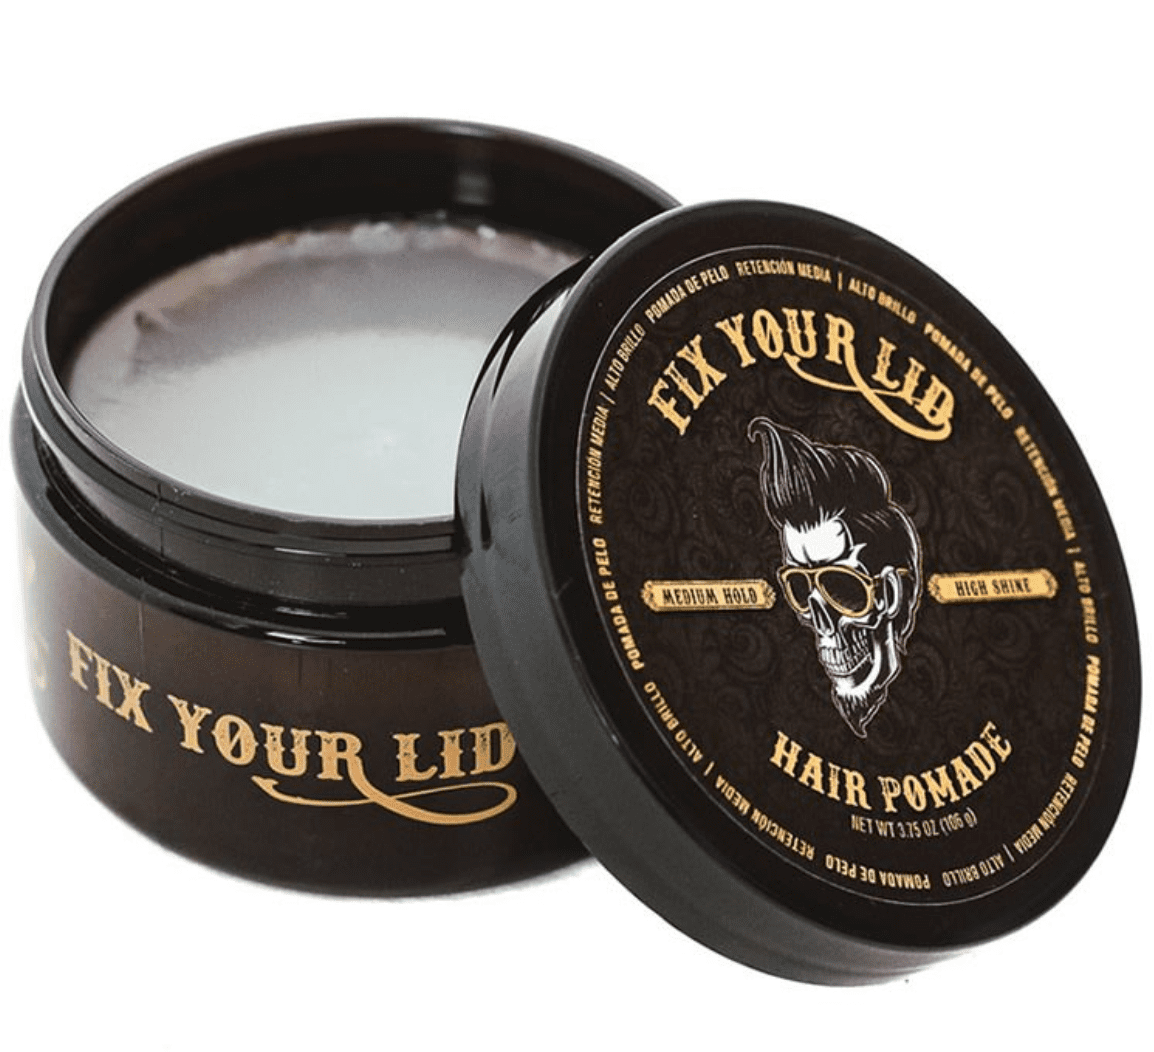 Fix Your Lid Extreme Hold Pomade - 3.75oz